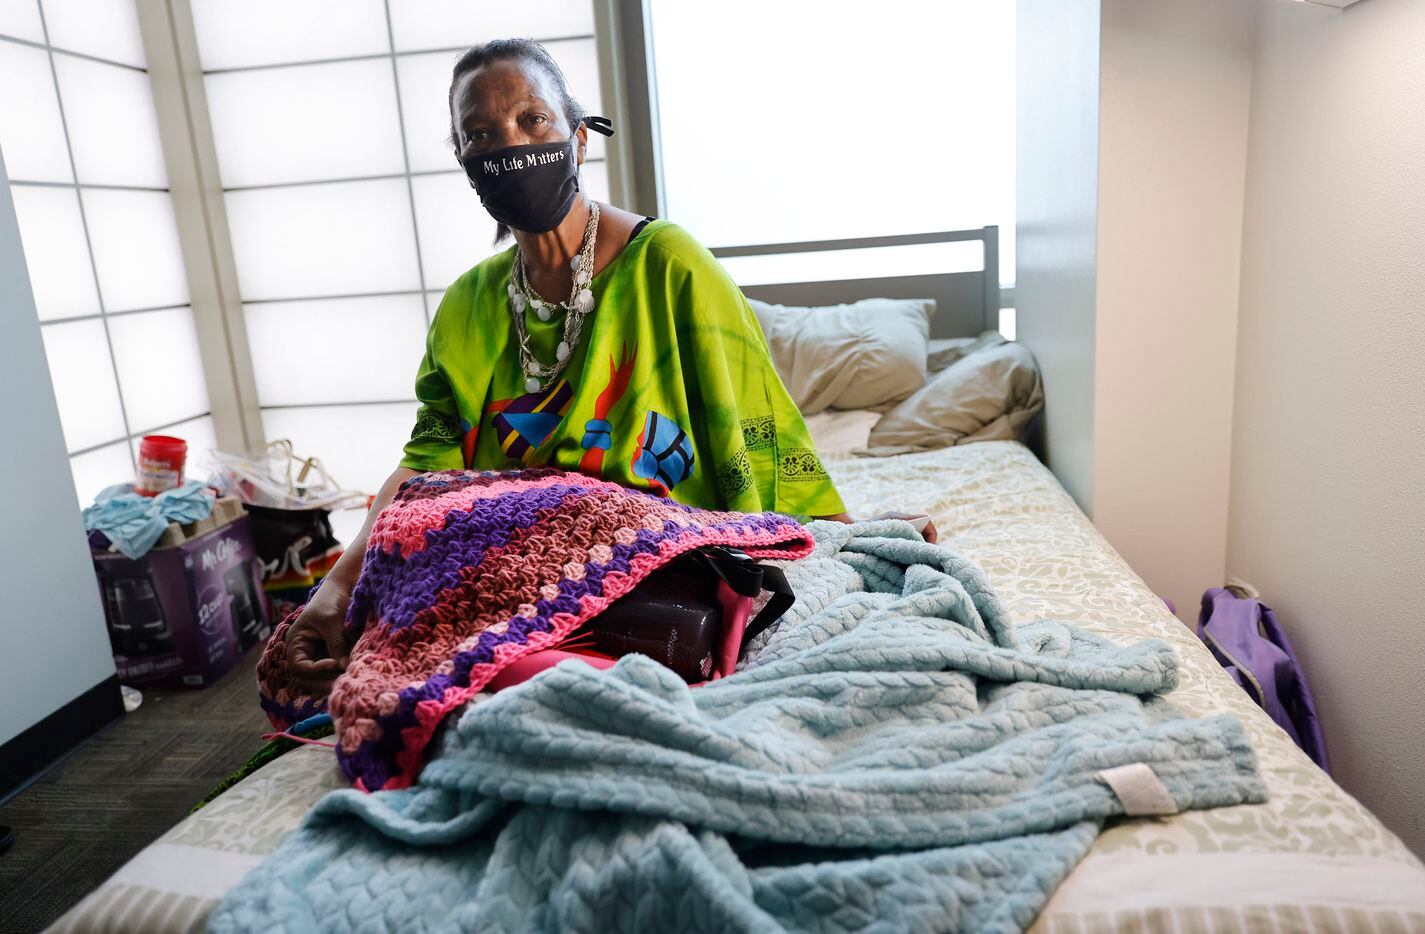 Patricia Freeman, 65, found her way to The Bridge Homeless Recovery Center in downtown Dallas earlier this year after nearly freezing to death at a Houston bus stop during February's deadly storm. She plans on getting settled into more permanent place with Rapid Rehousing under the assistance of her case manager Amanda Crowe. Patricia is photographed in her transitional room with a blanket she is crocheting at The Bridge, Thursday, July 29, 2021. (Tom Fox/The Dallas Morning News)